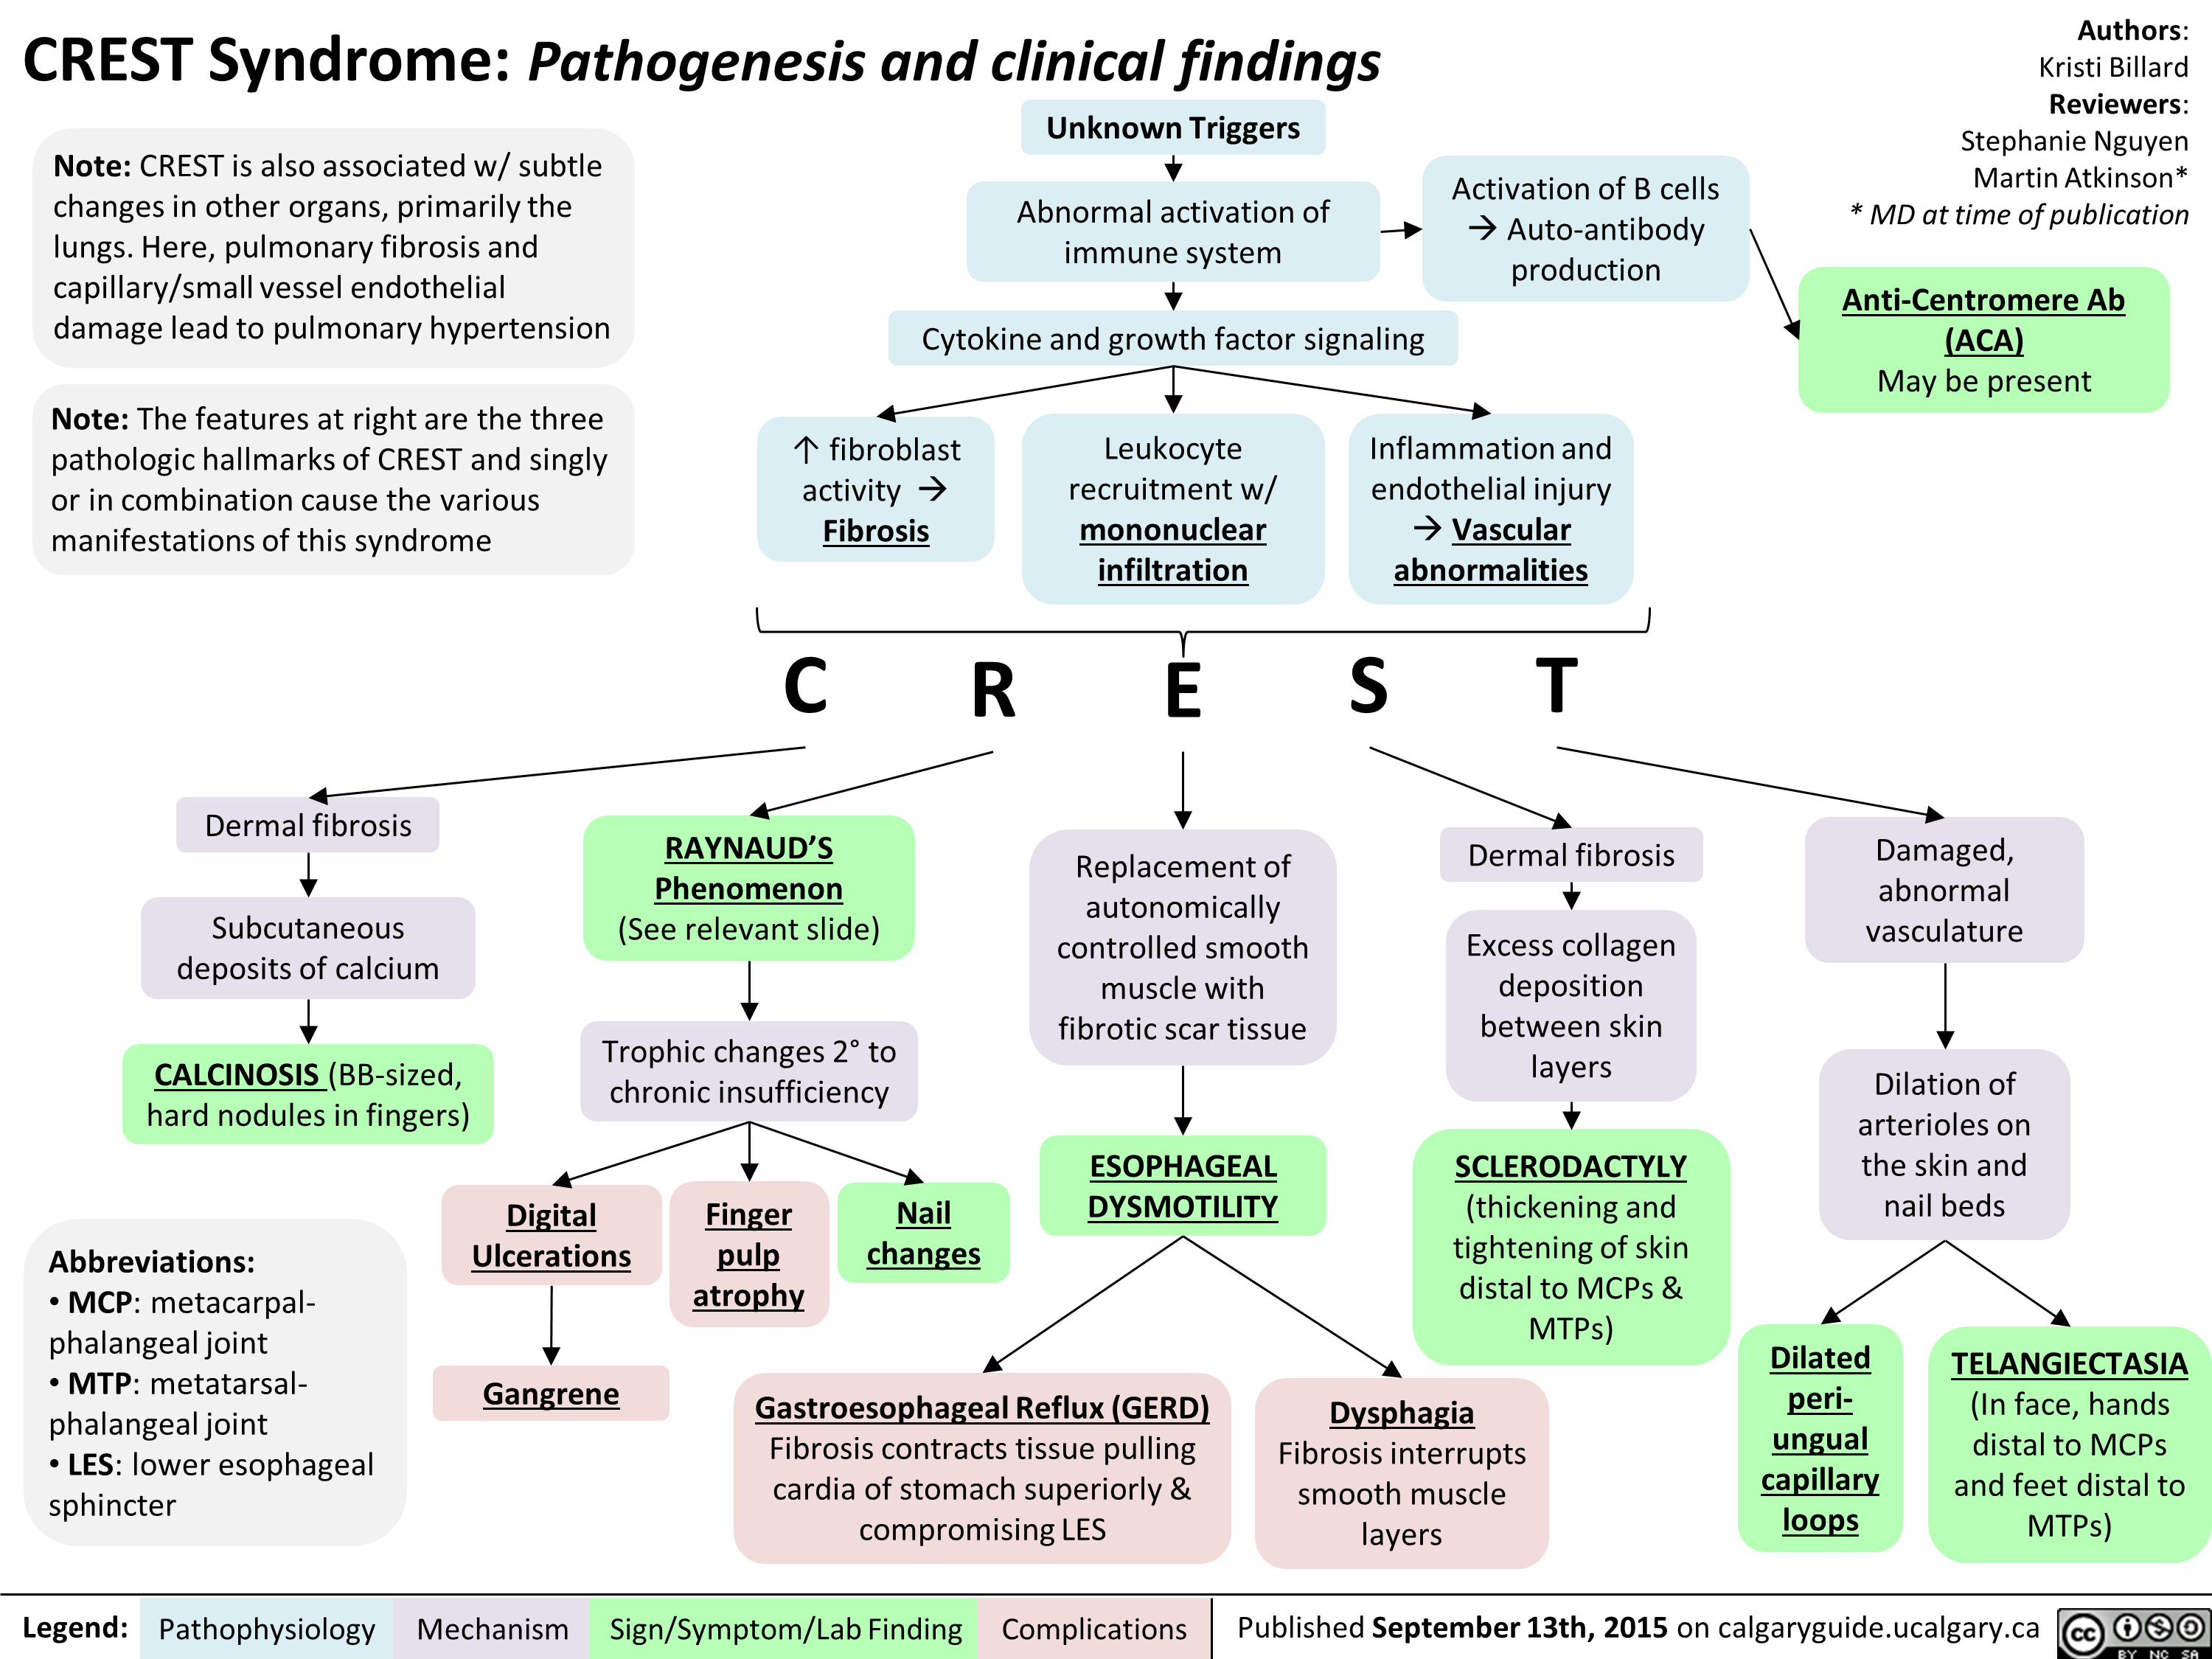 FINAL - CREST Syndrome Pathogenesis and clinical findings